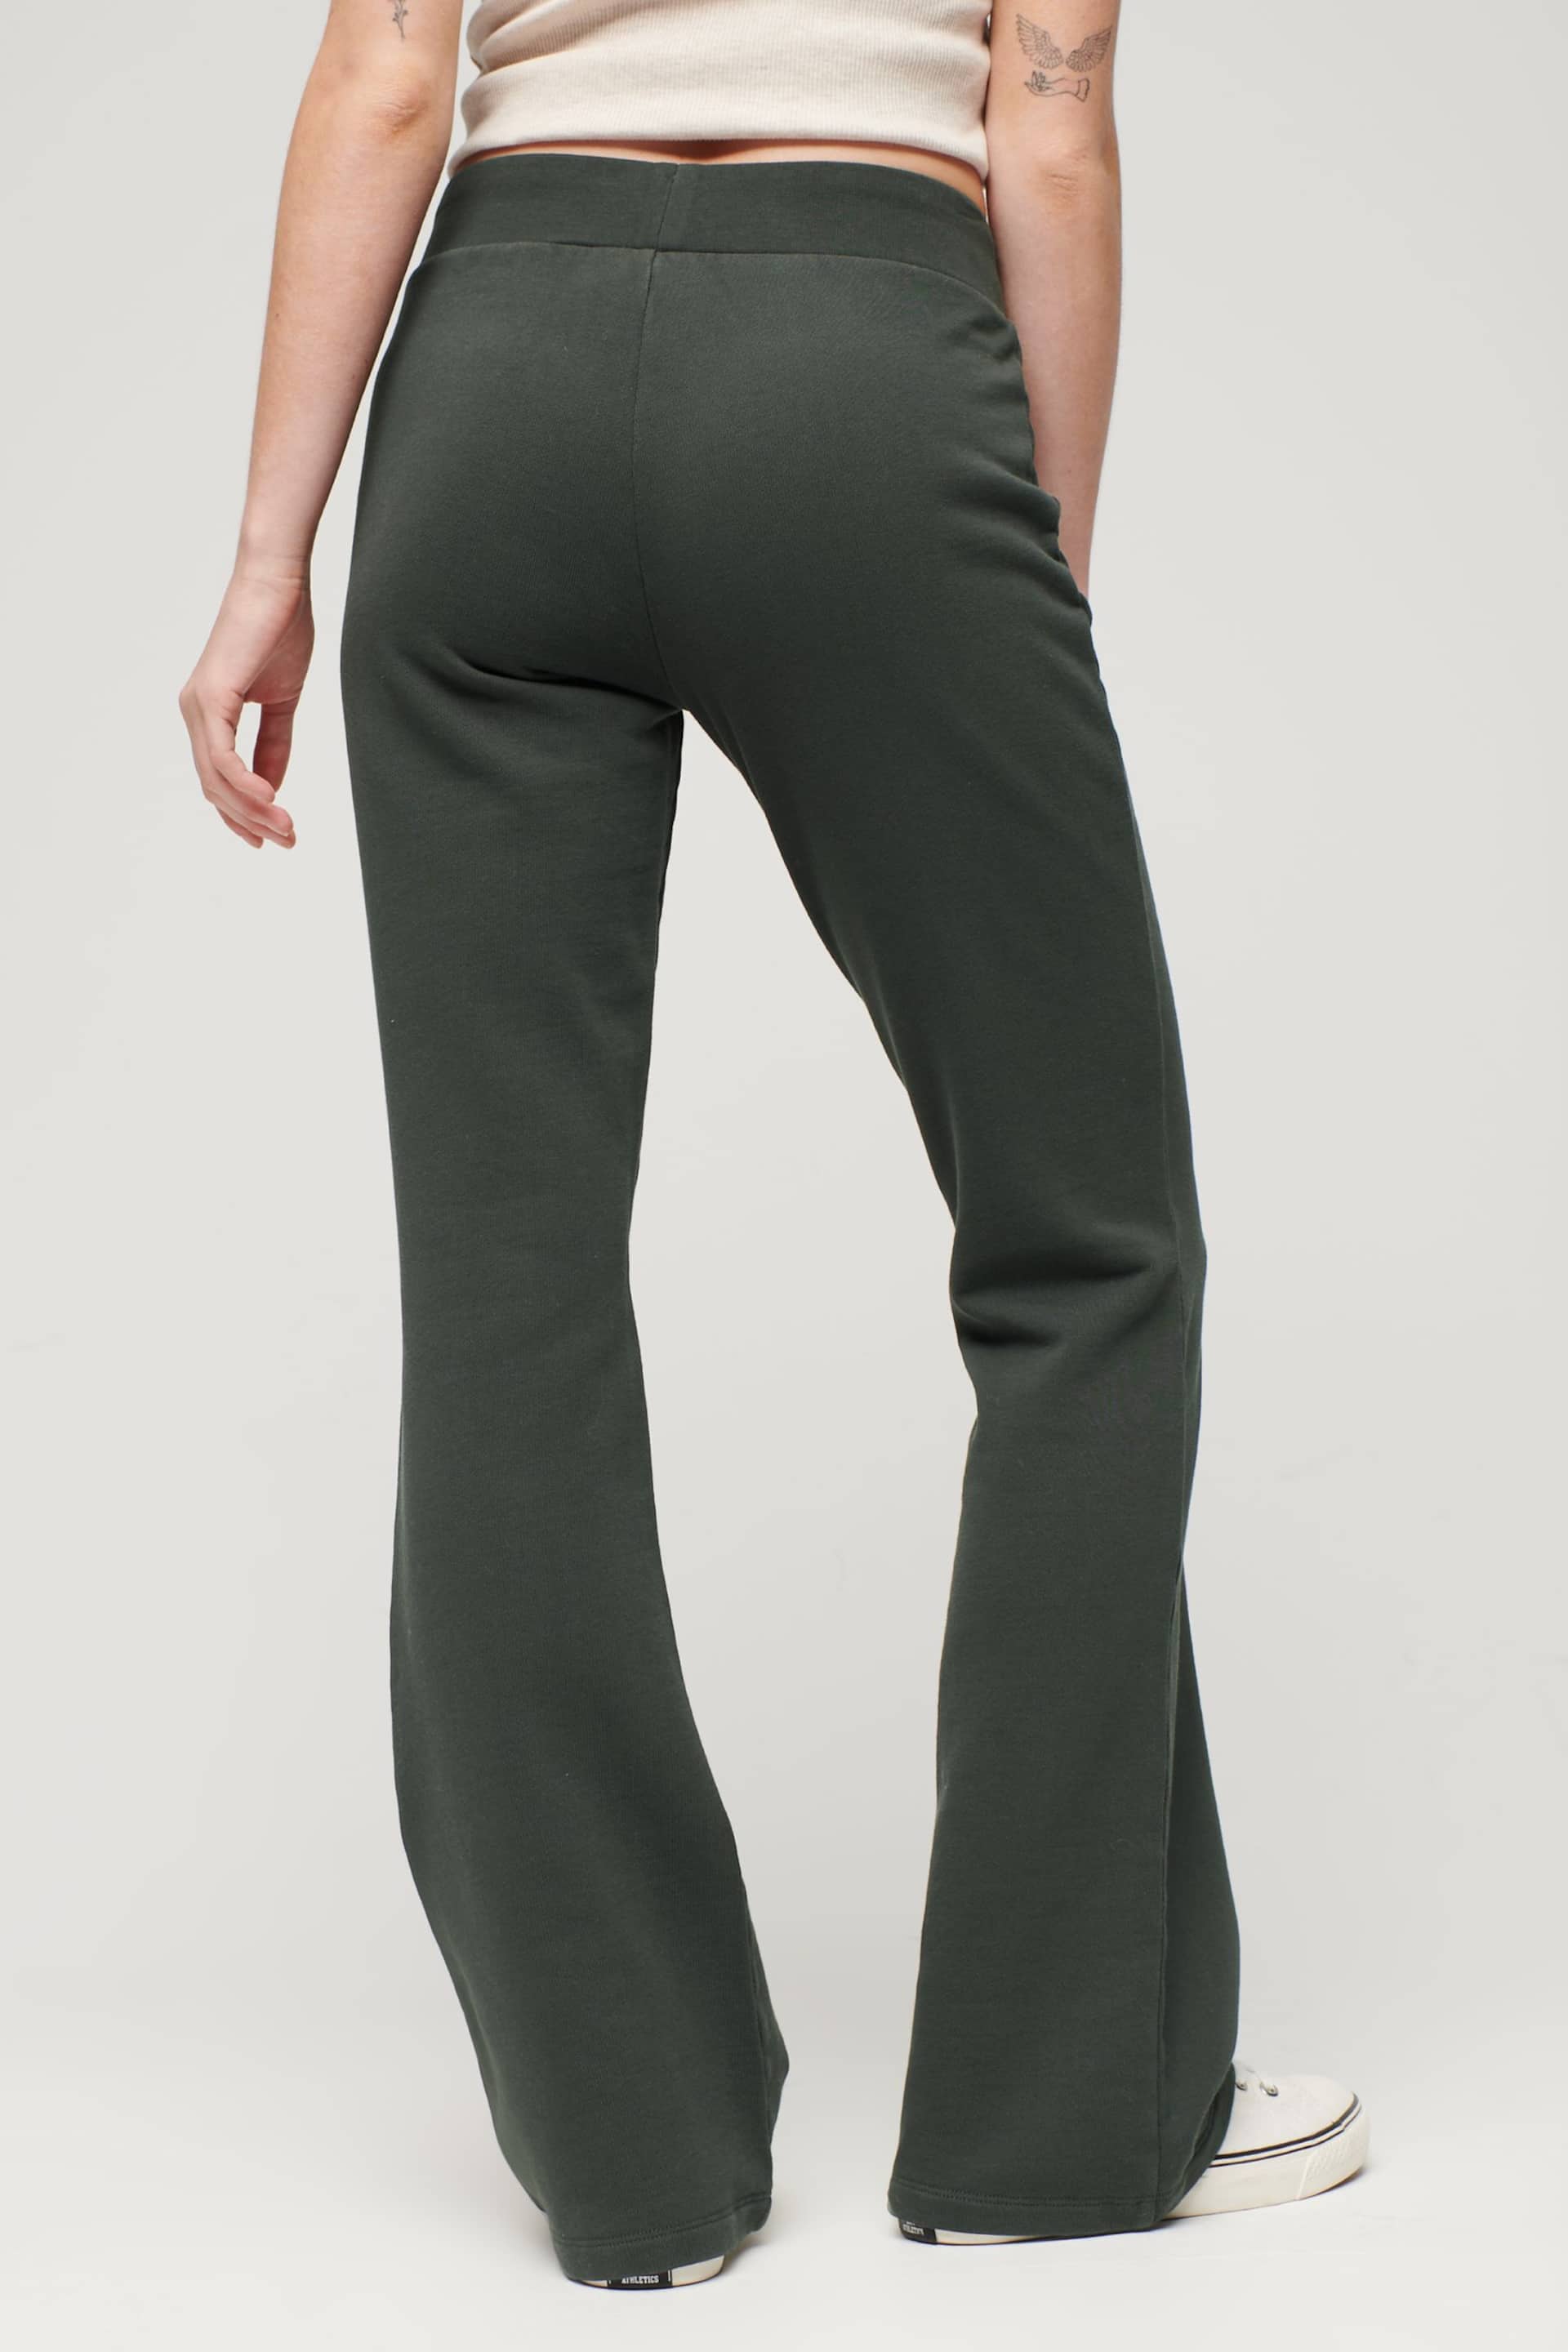 Superdry Green Athletic Essential Jersey Flare Joggers - Image 2 of 6